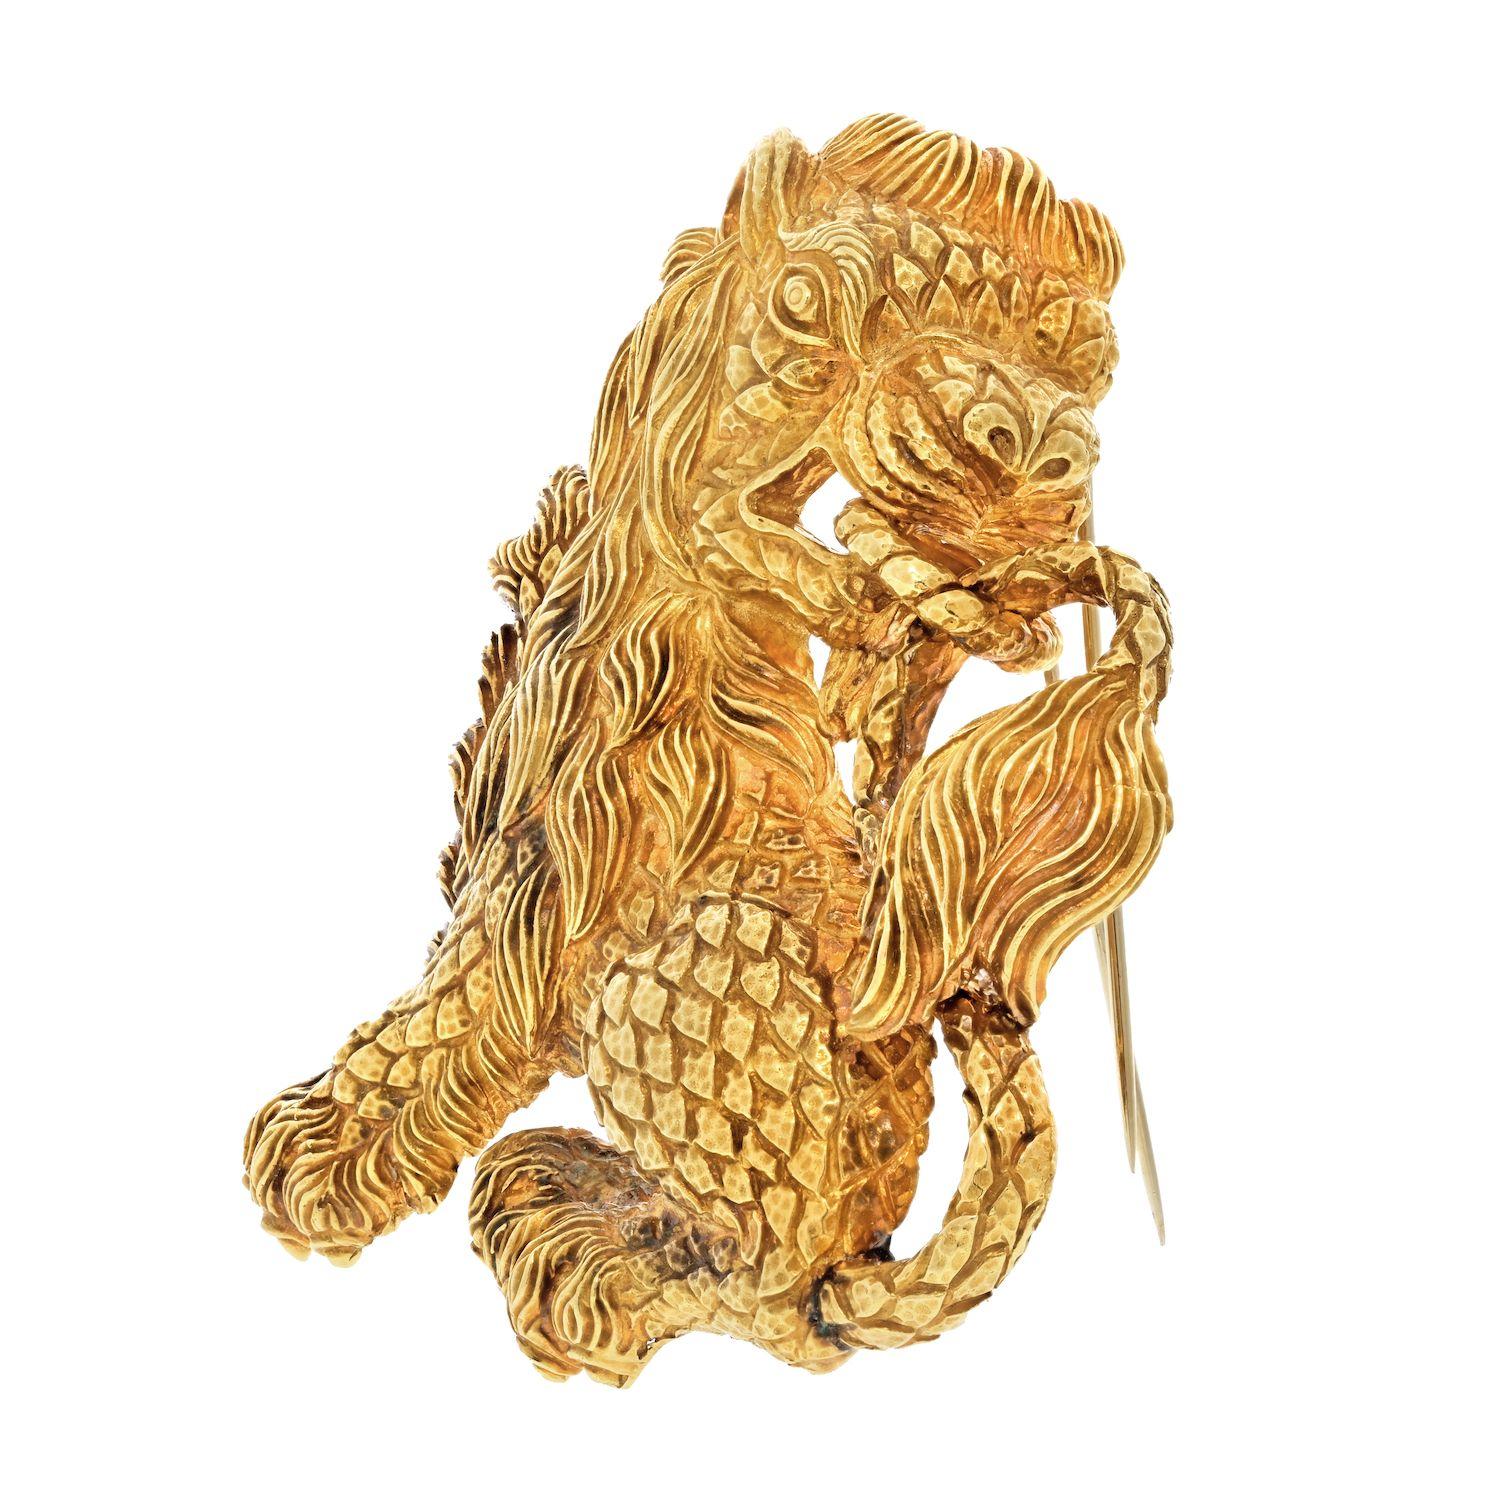 Unleash your inner queen with the magnificent David Webb Lion 18K Yellow Gold Brooch. This awe-inspiring piece is a symbol of strength and power, crafted with utmost precision and finesse. As you adorn yourself with this majestic brooch, heads will